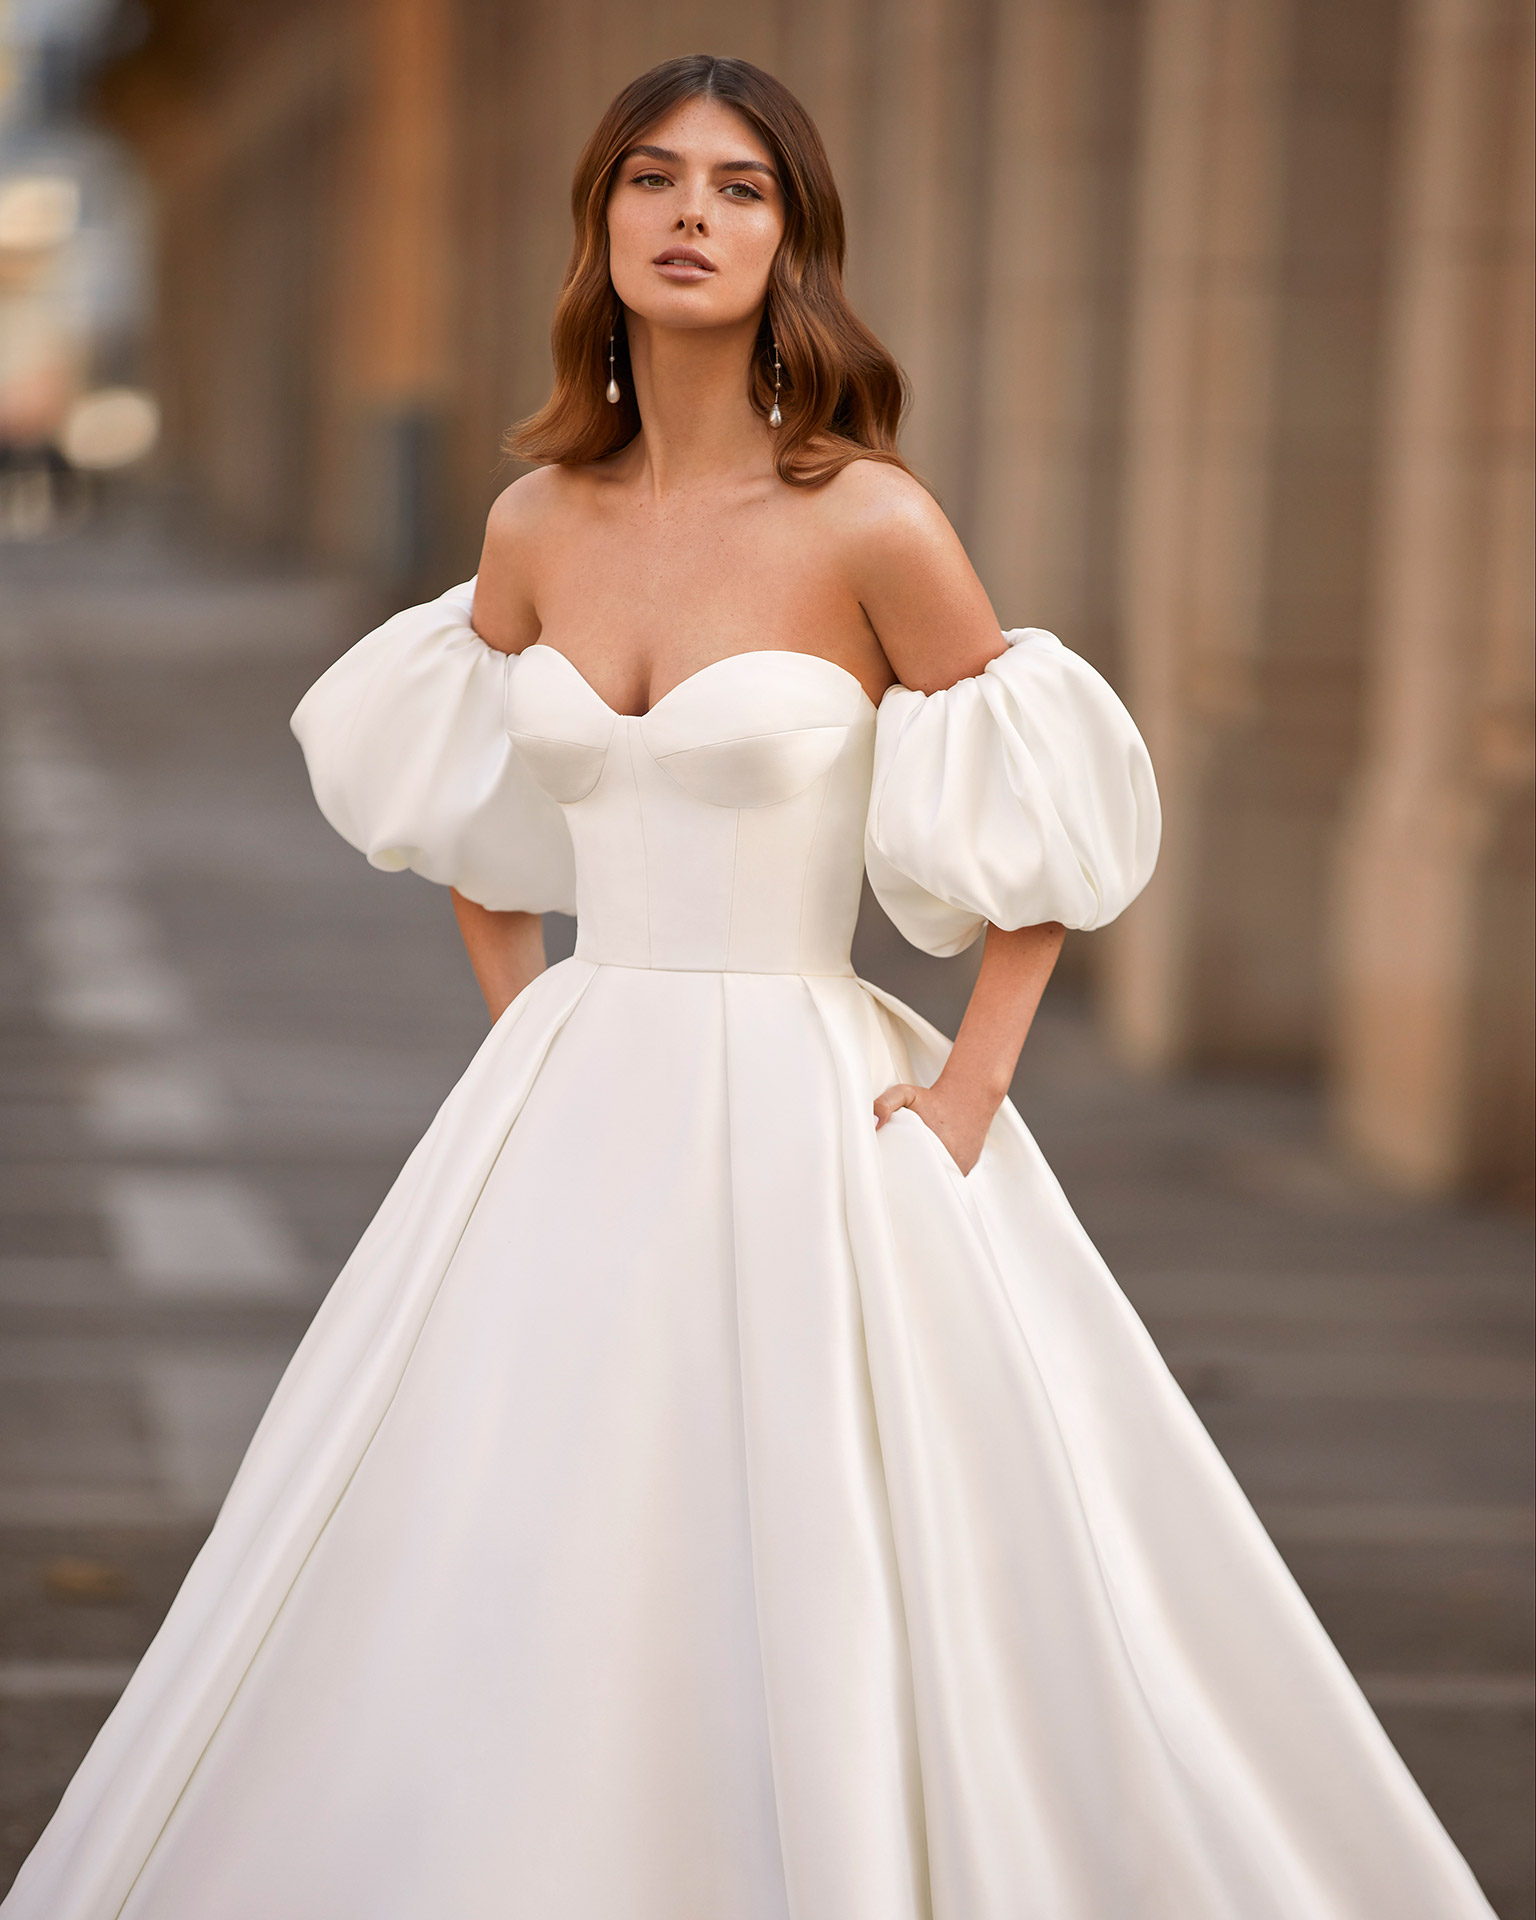 Classic princess-style wedding dress, made of matt Mikado, with a voluminous sheath-style skirt; with a strapless neckline, a buttoned back down to the end of the train, and puffed sleeves. Dreamy Luna Novias dress made entirely of Mikado. LUNA_NOVIAS.